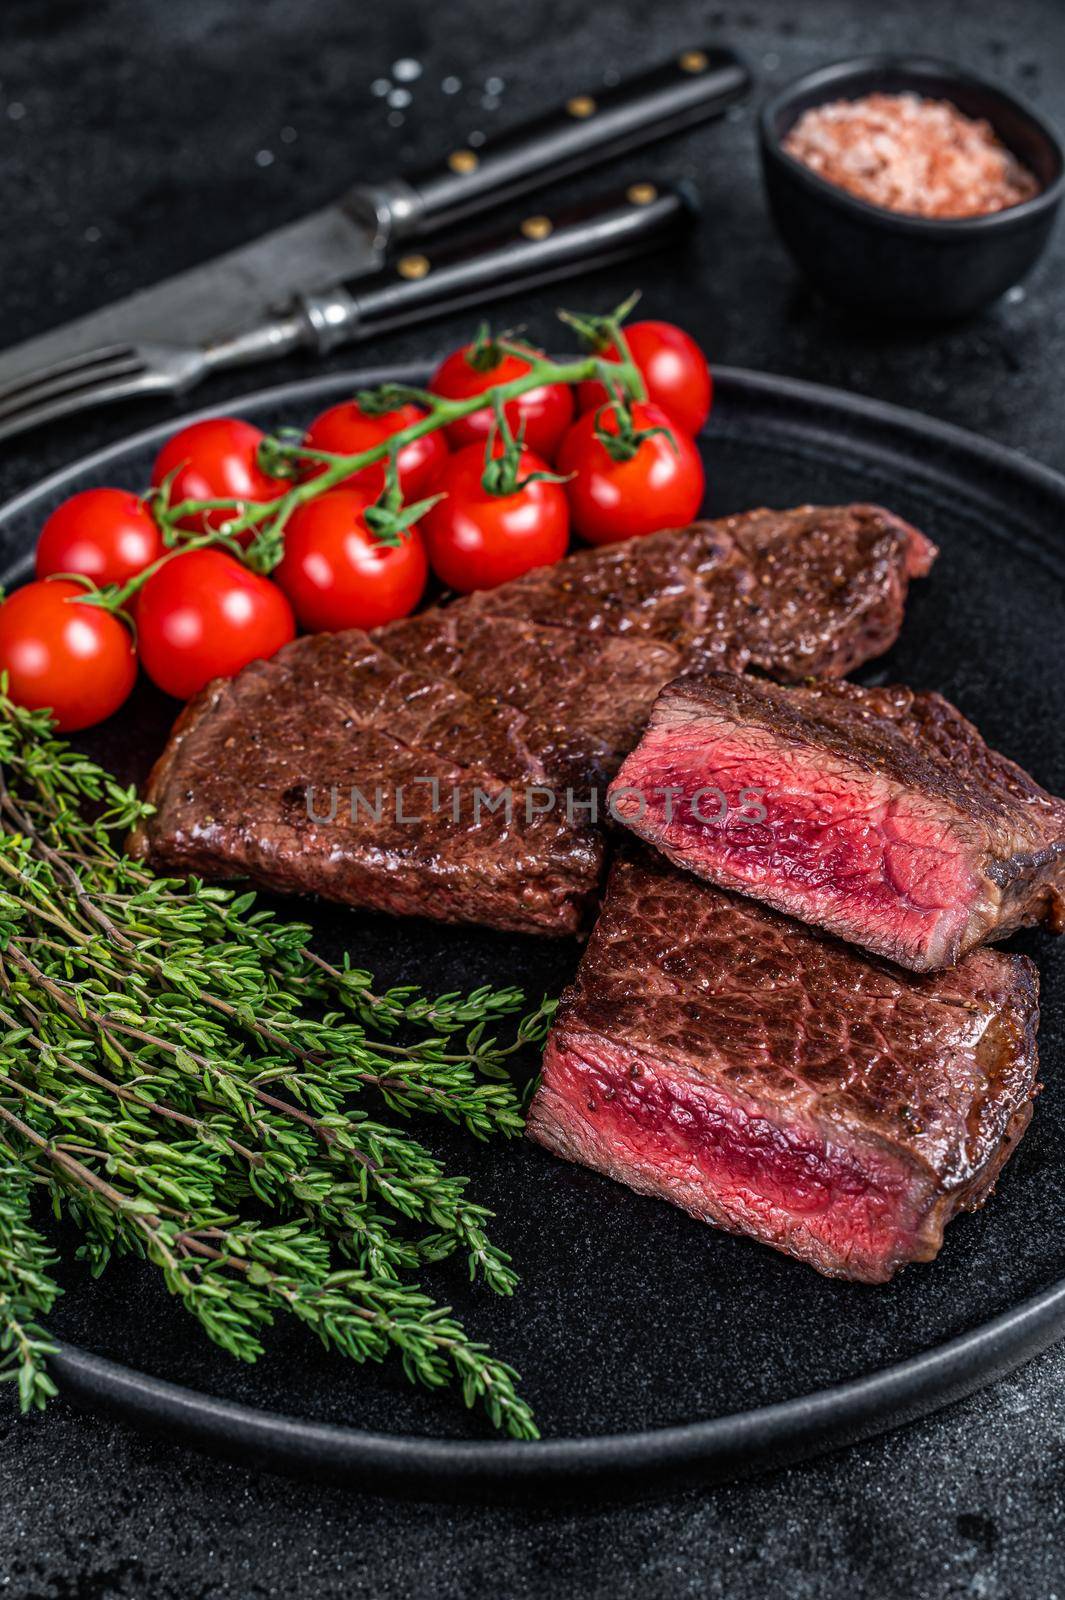 Roasted cut denver beef meat steak on a plate with thyme. Black background. Top view.